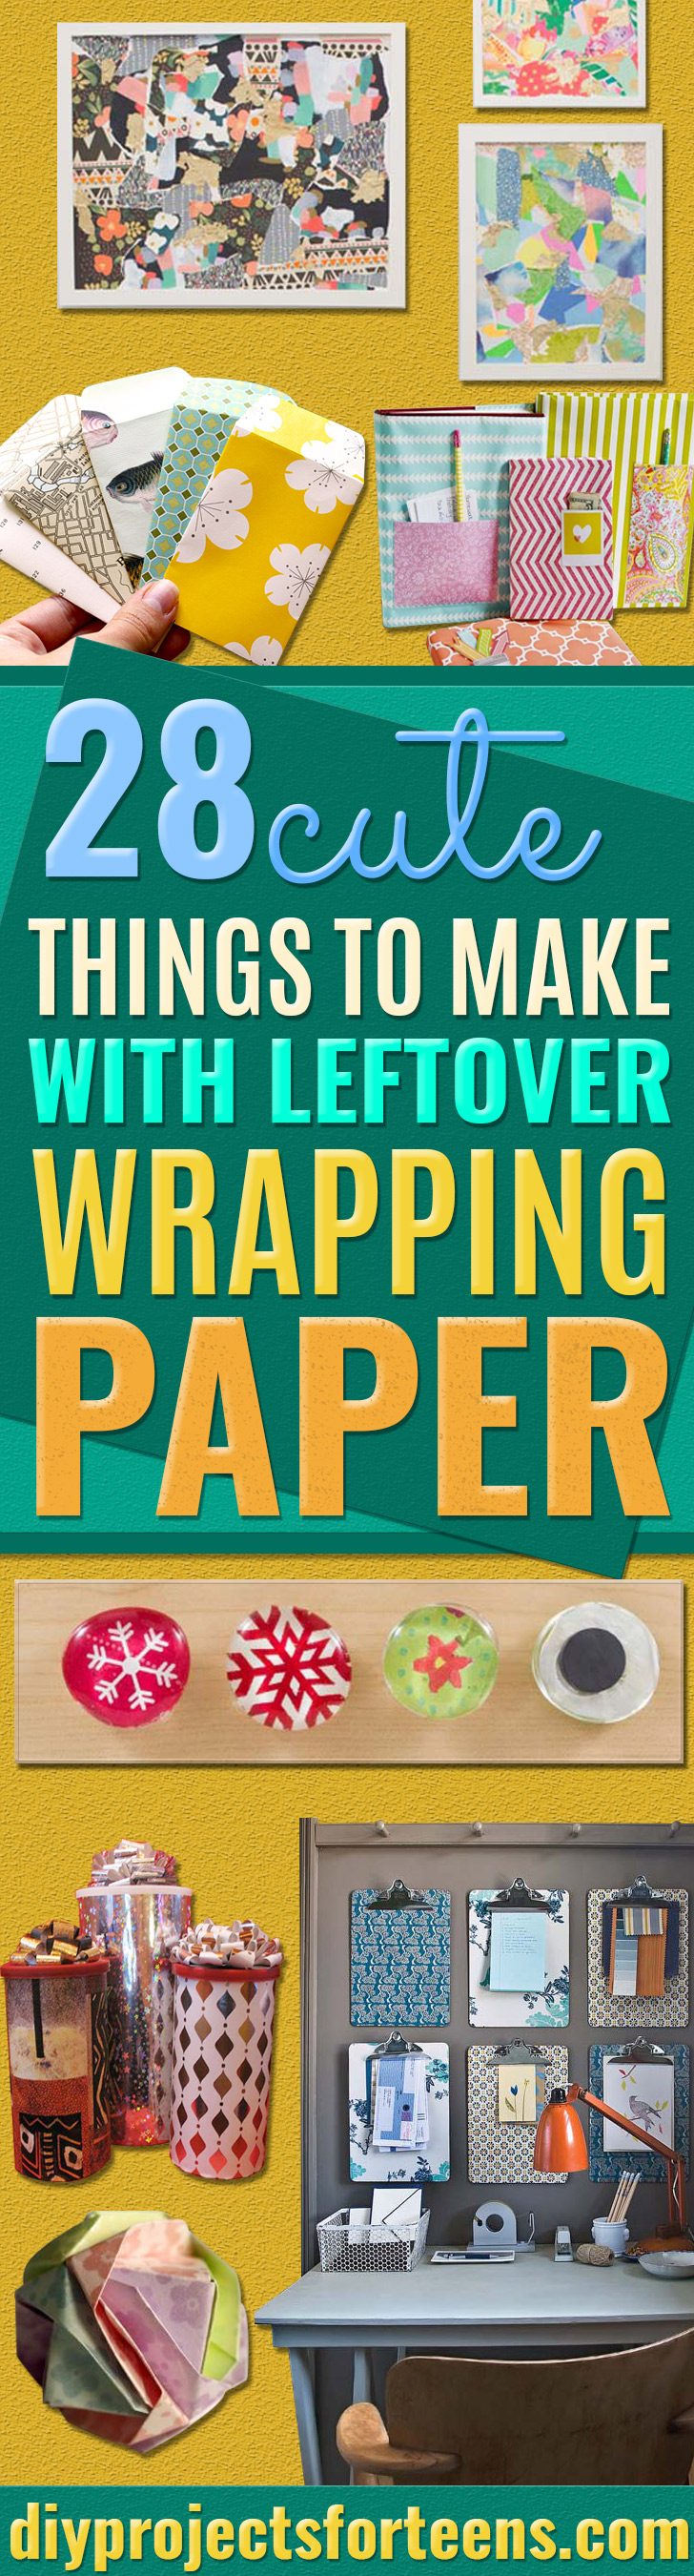 Cool Things to Make With Leftover Wrapping Paper - Easy Crafts, Fun DIY Projects, Gifts and DIY Home Decor Ideas - Don't Trash The Christmas Wrapping Paper and Learn How To Make These Awesome Ideas Instead - Creative Craft Ideas for Teens, Tweens, Teenagers, Boys and Girls 